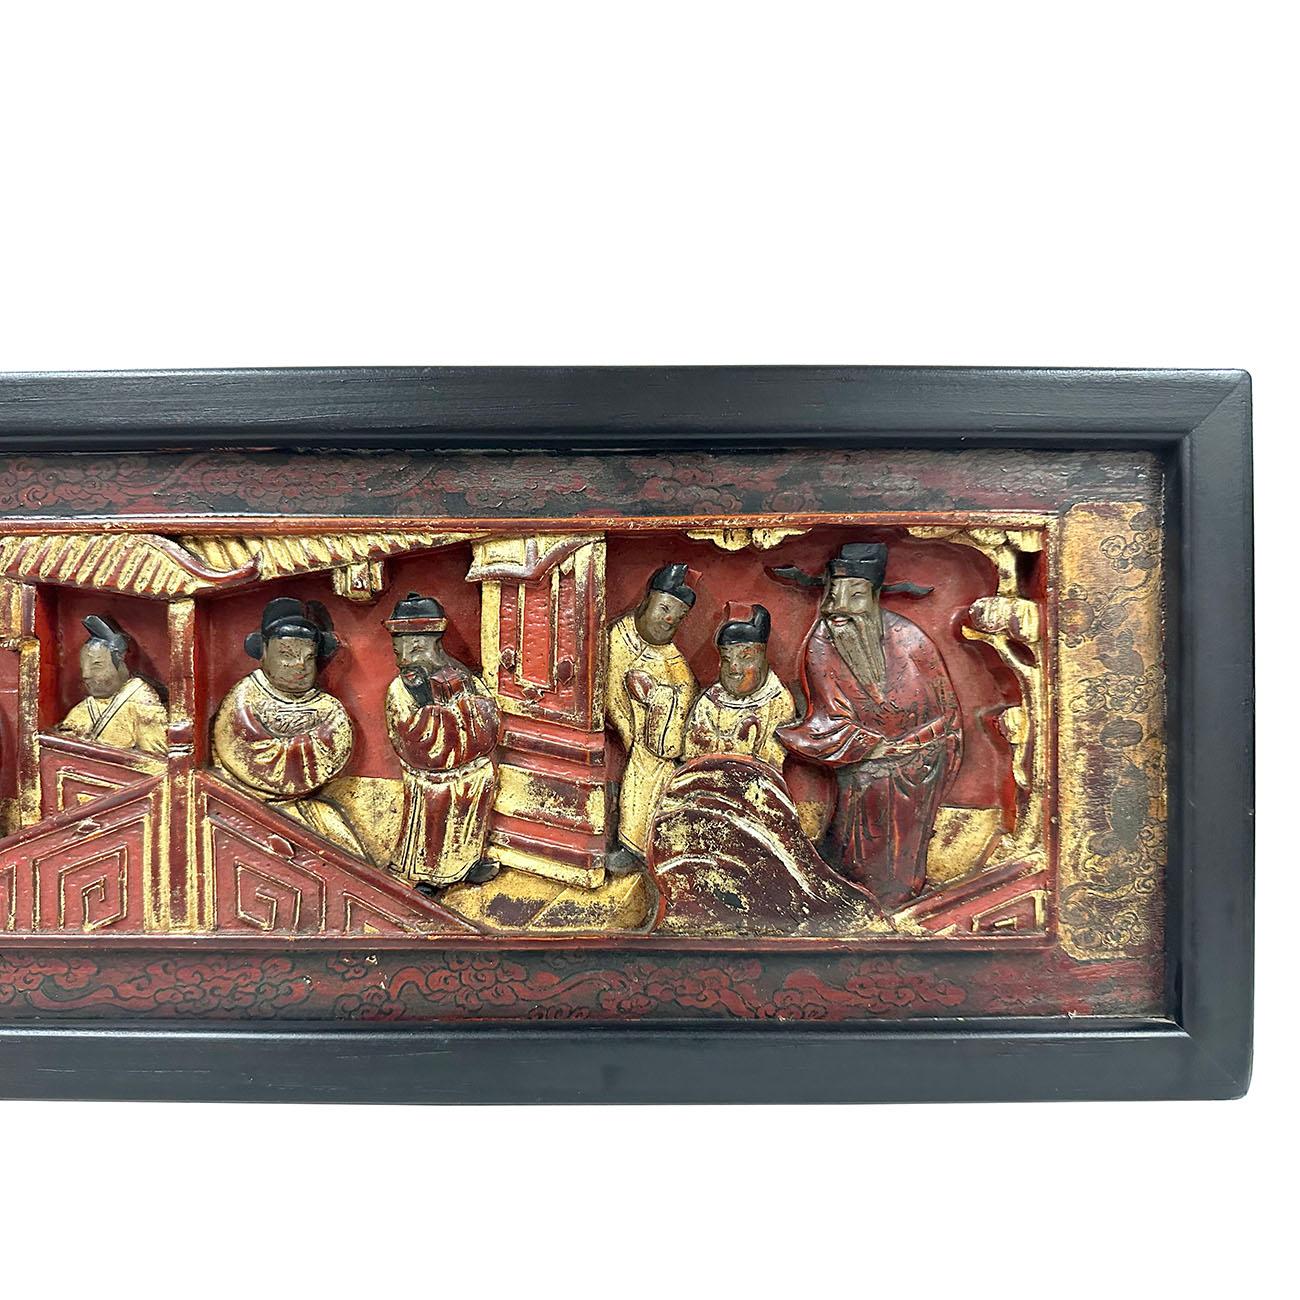 Chinese Export 19th Century Chinese 3d Carving Wood Panel Hanging Architectural Element